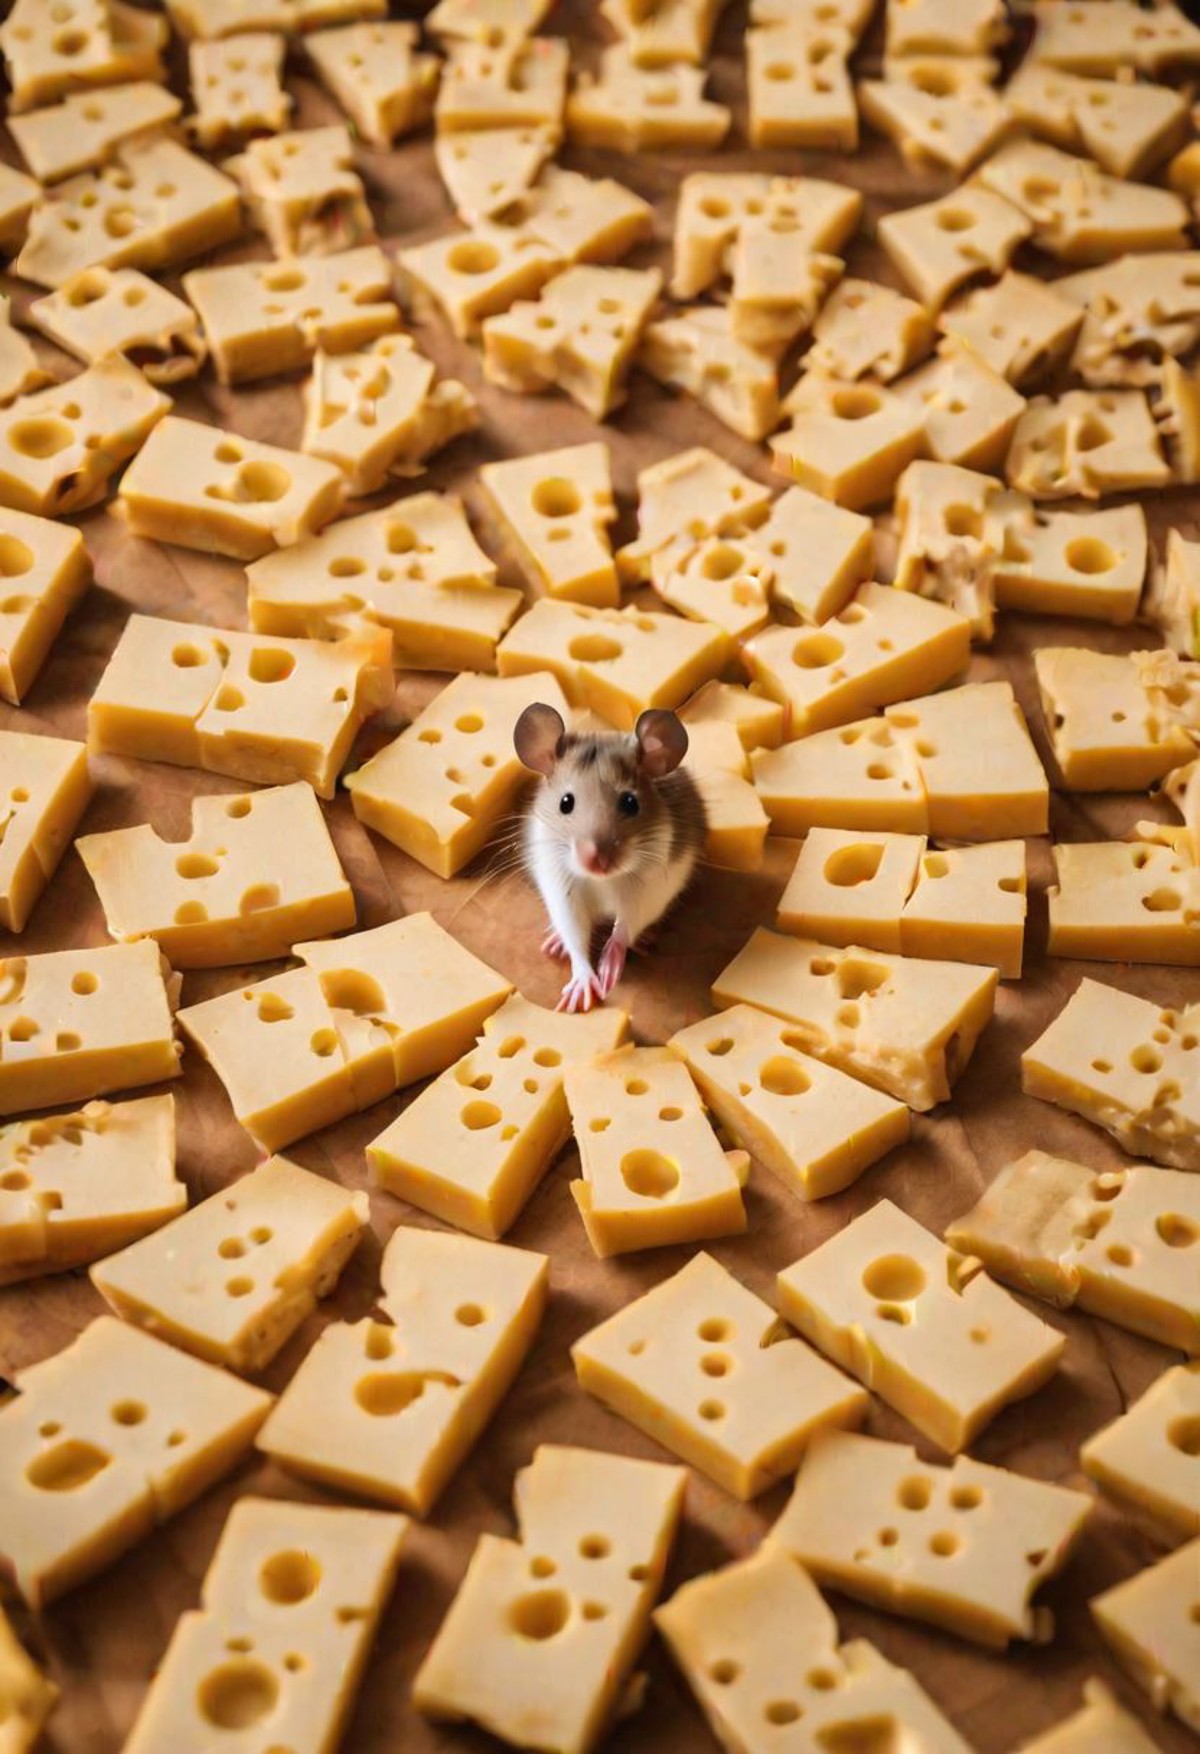 mouse surrounded by mousetraps with cheese inside, view from above